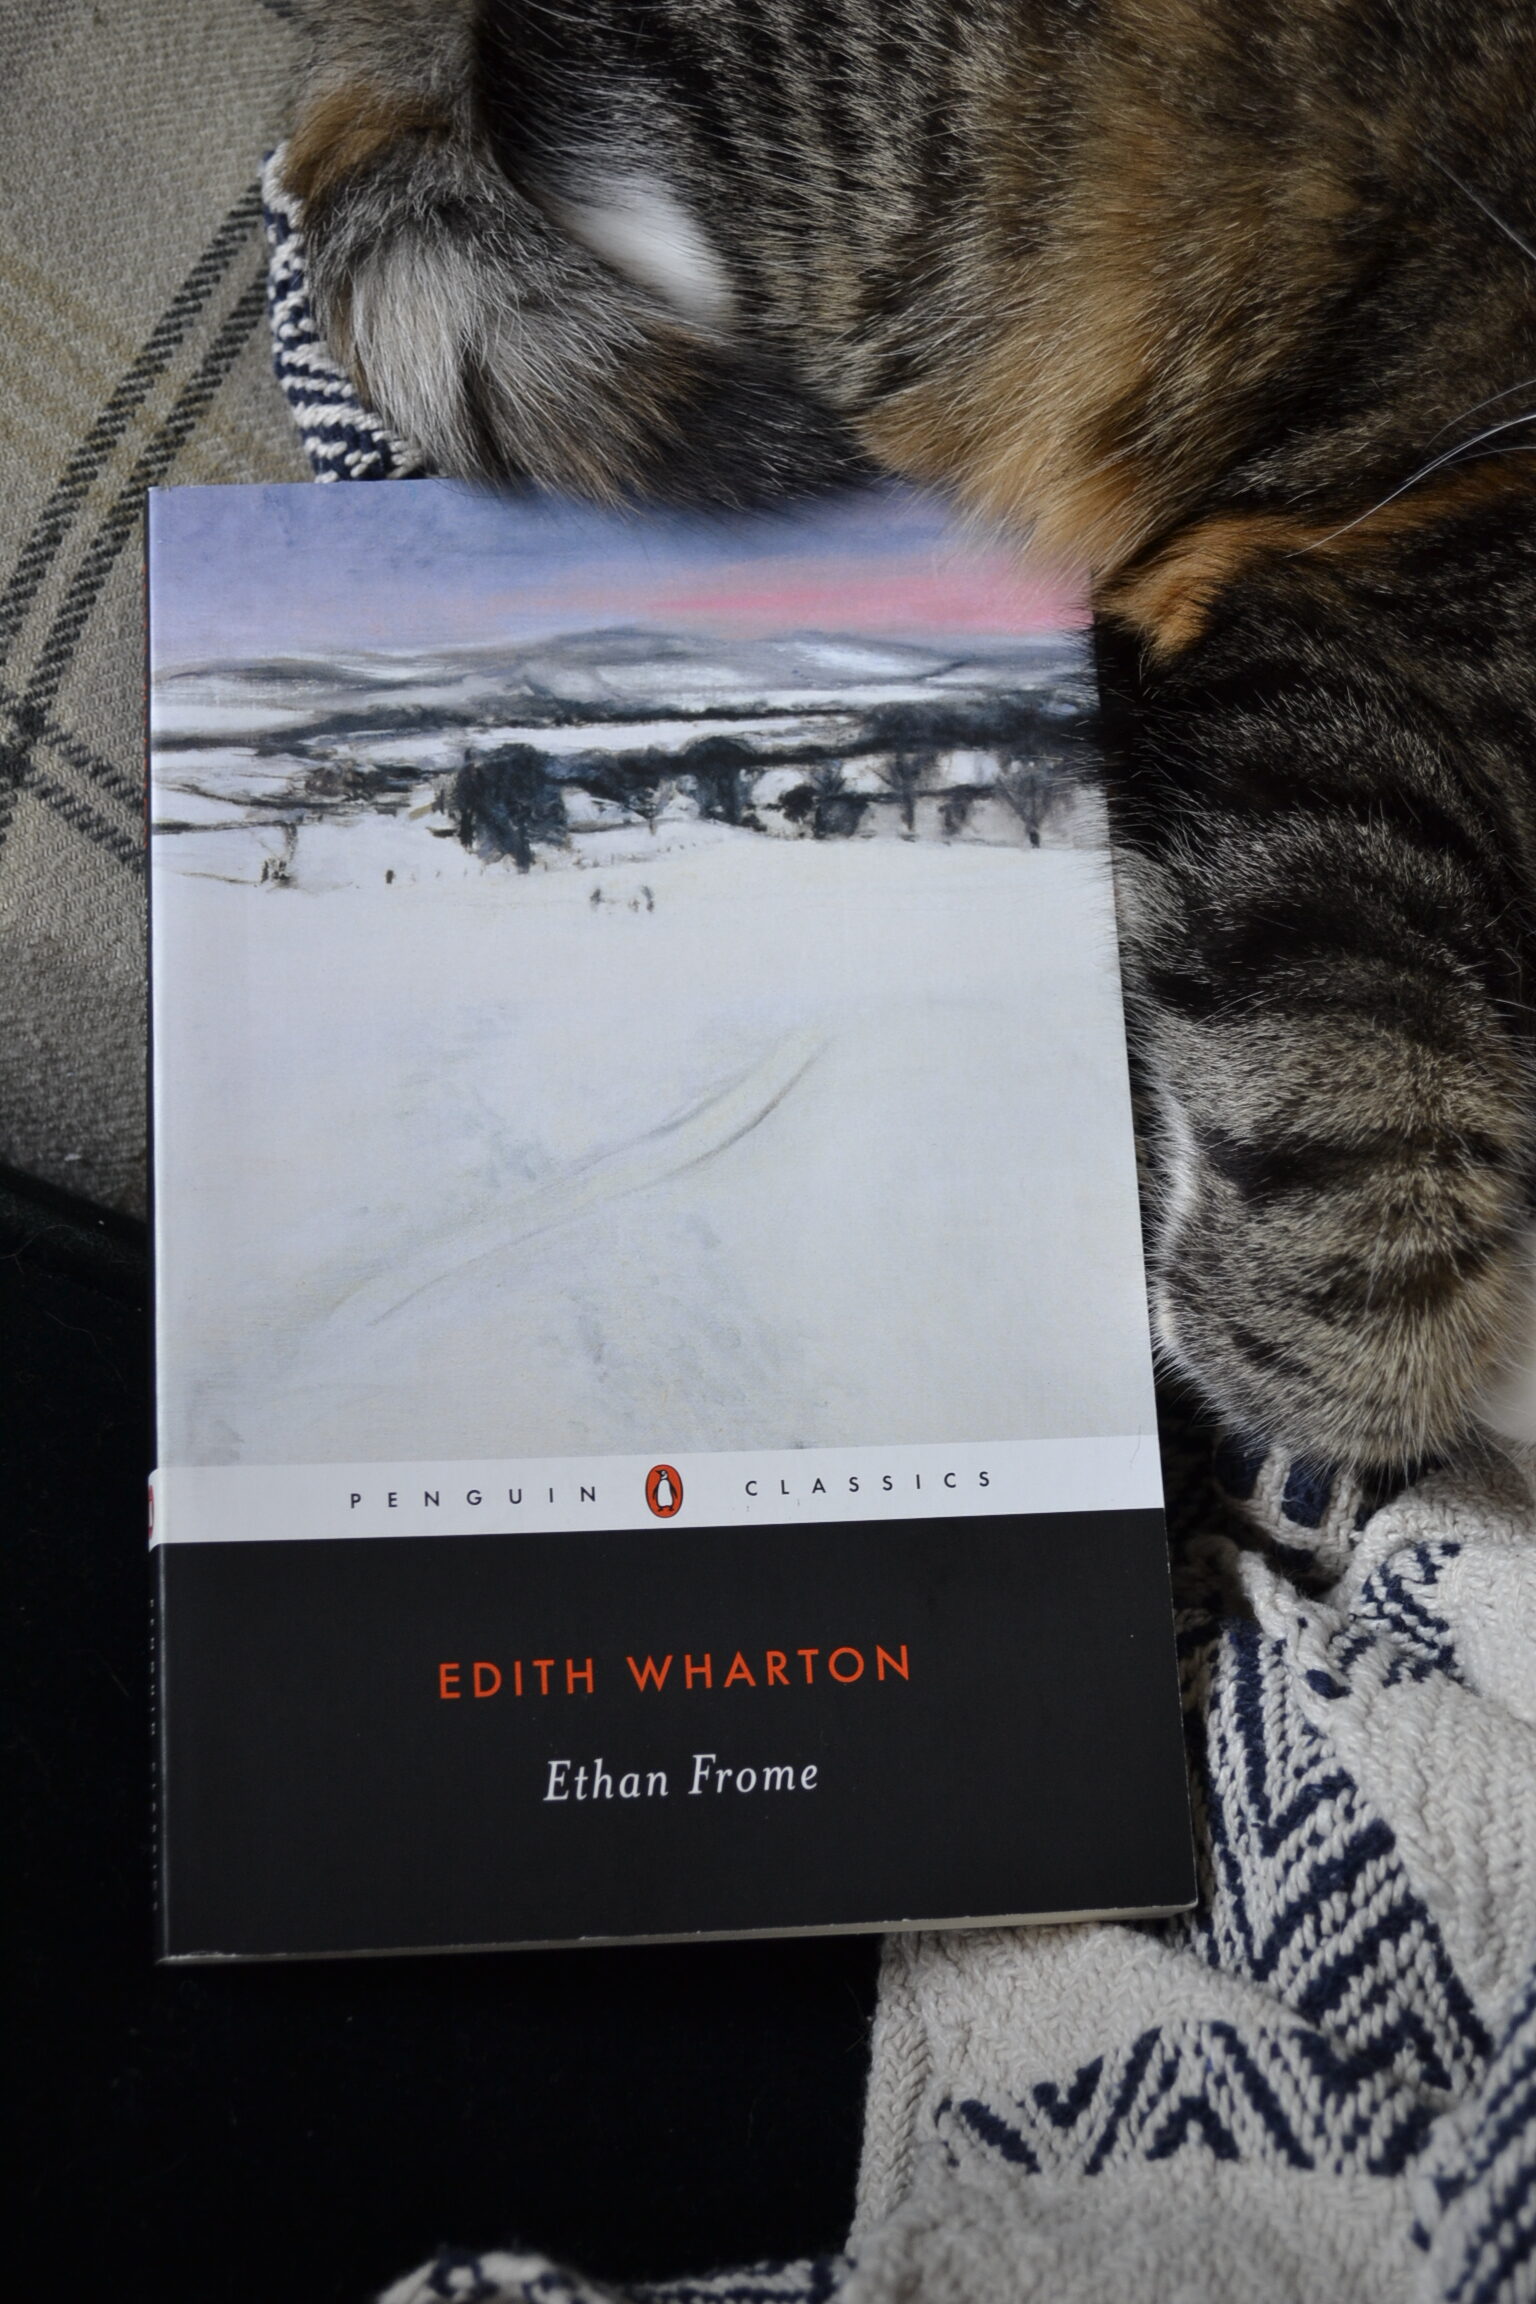 Edith Wharton's Edith Frome sits on a chair with a calico tabby cat.